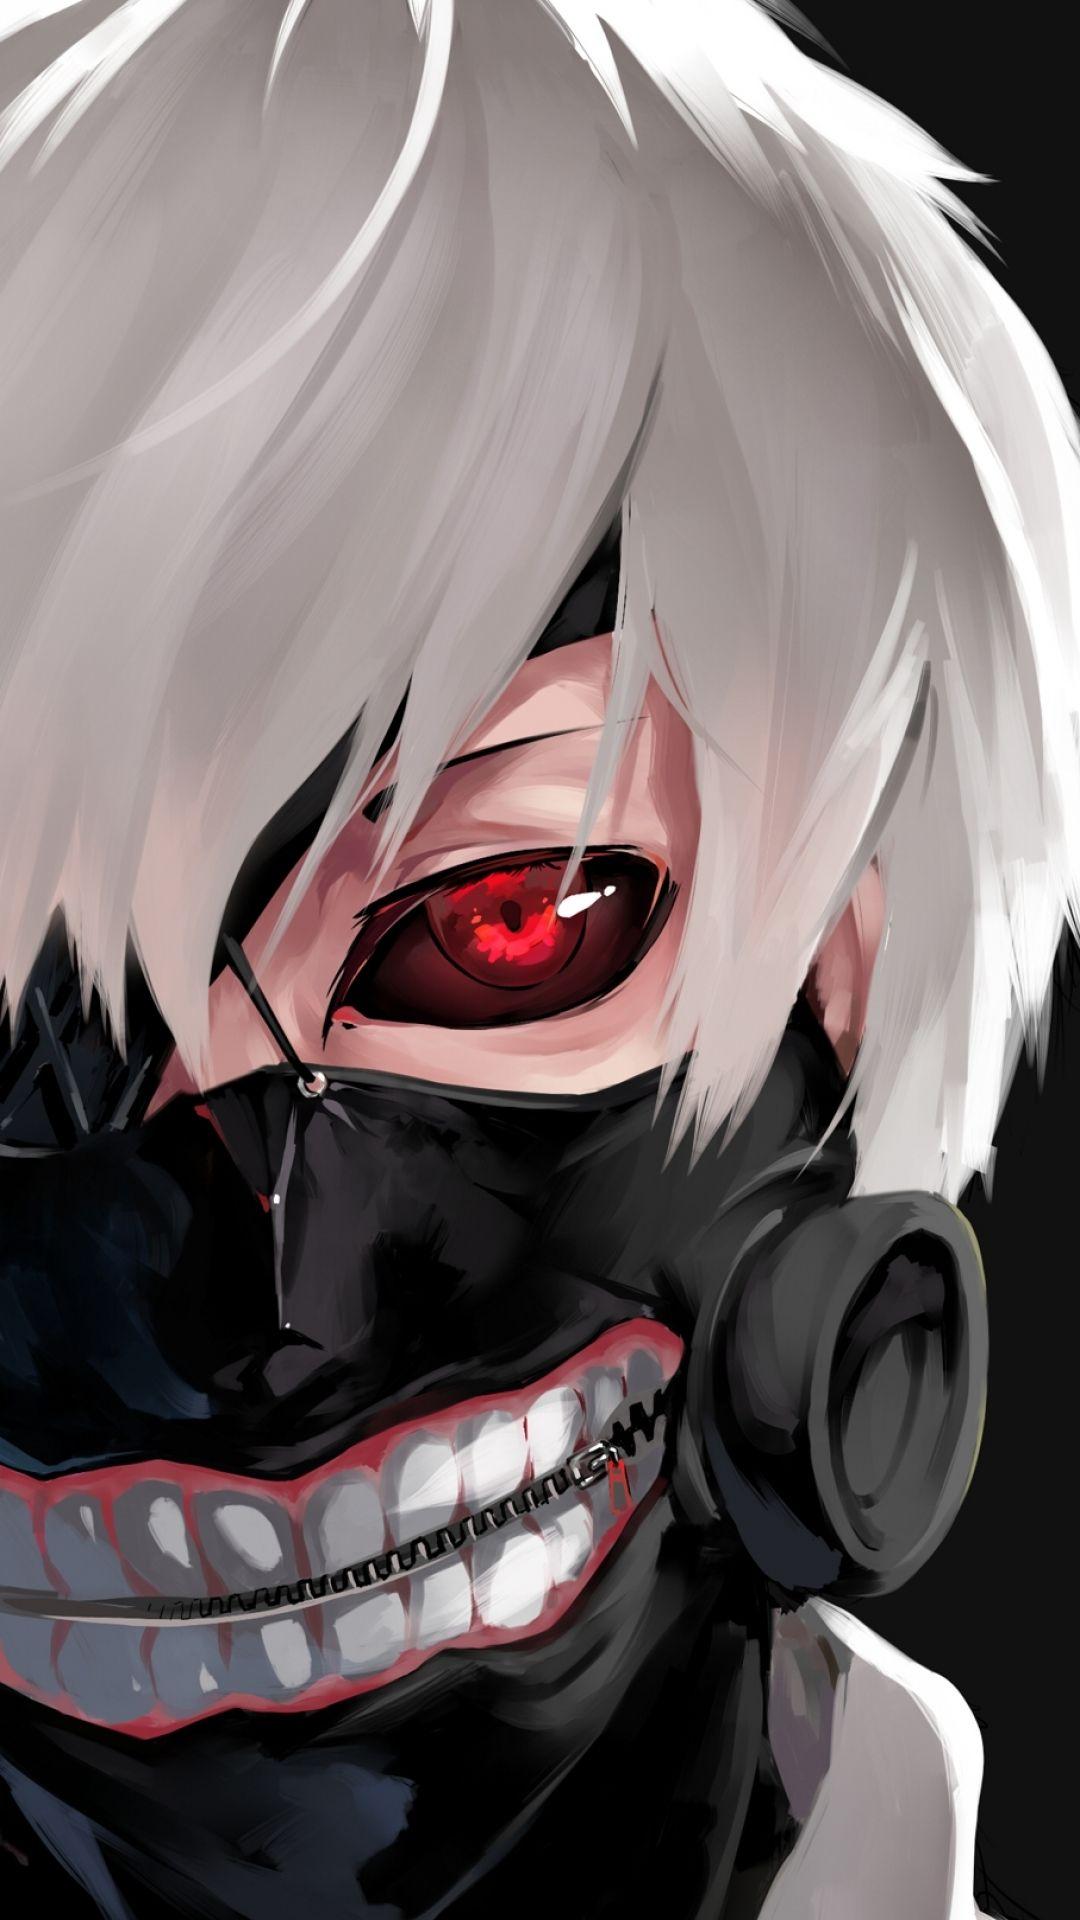 Tokyo Ghoul Wallpaper for Desktop, Mobile and iPhone